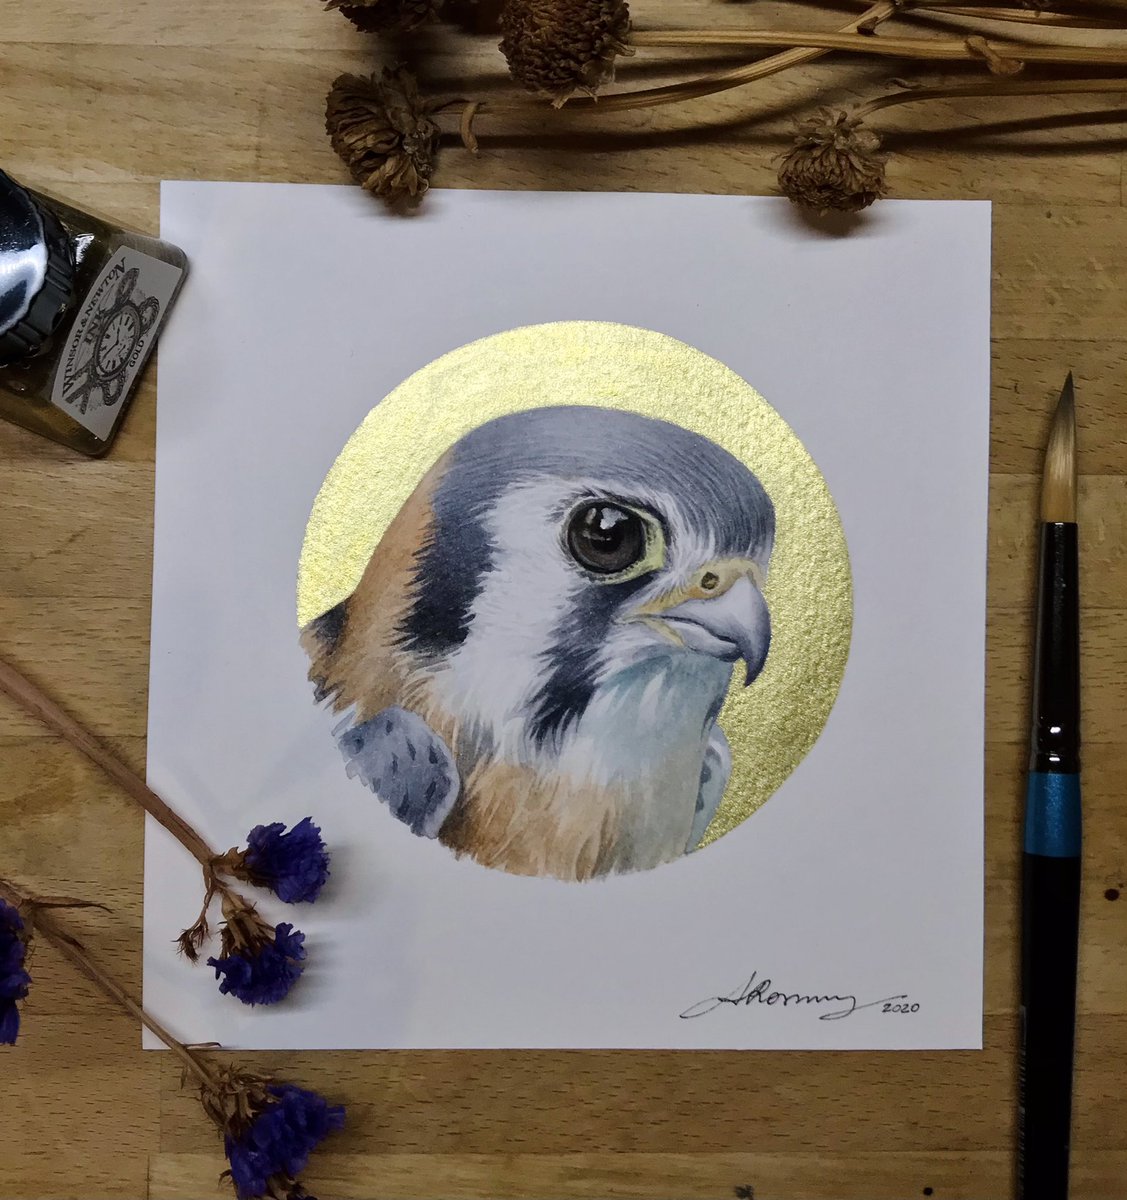 American Kestrel, watercolors and gold ink. For the monthly #birdwhisperer project! 💙 

#watercolors #birdwhispererproject #birds